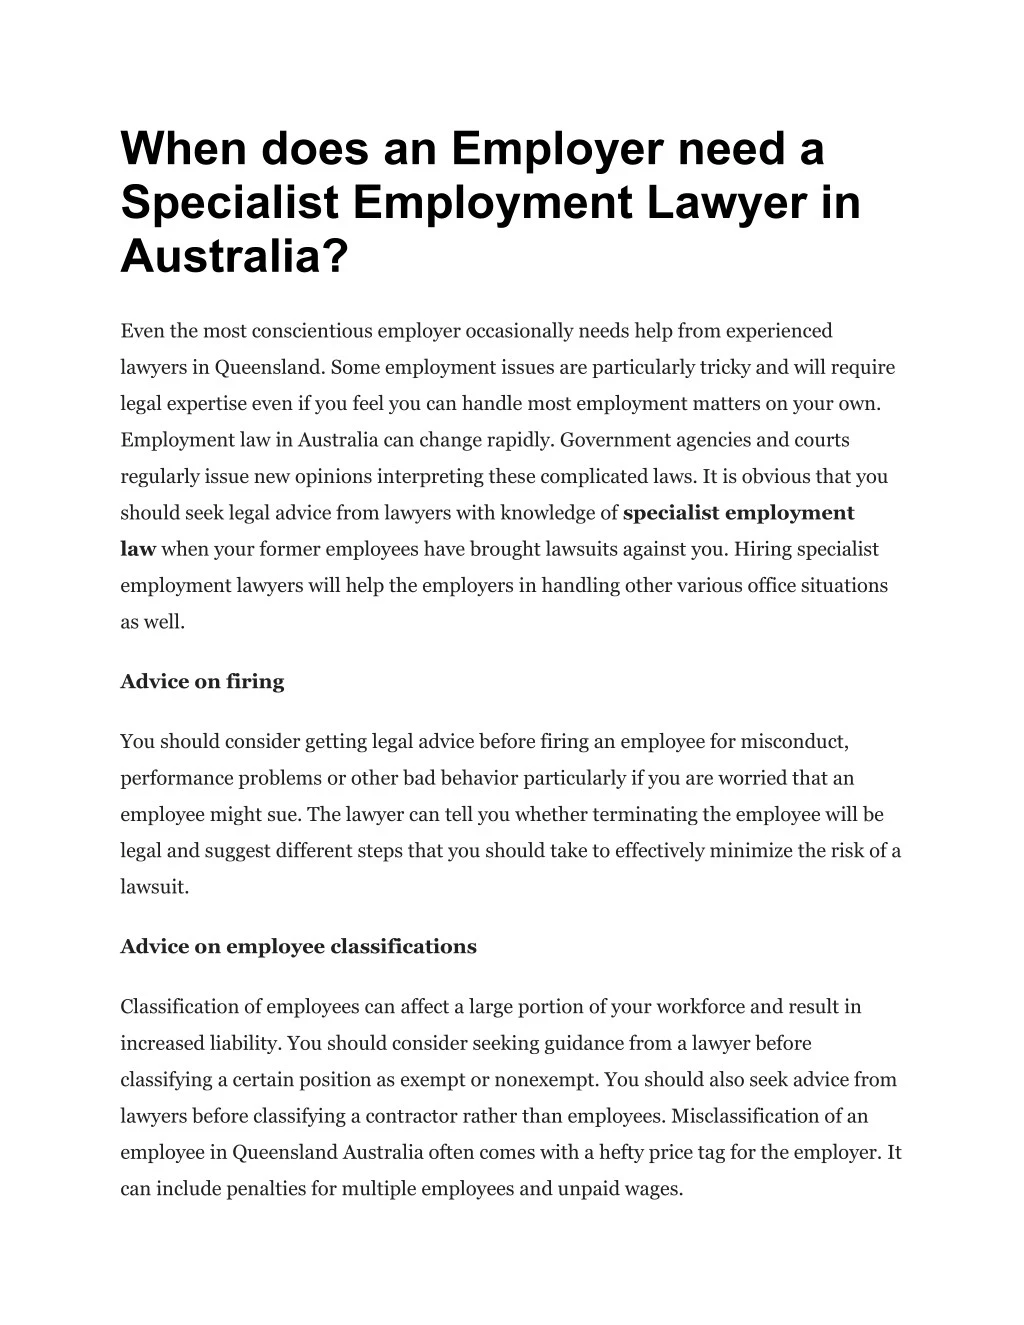 when does an employer need a specialist